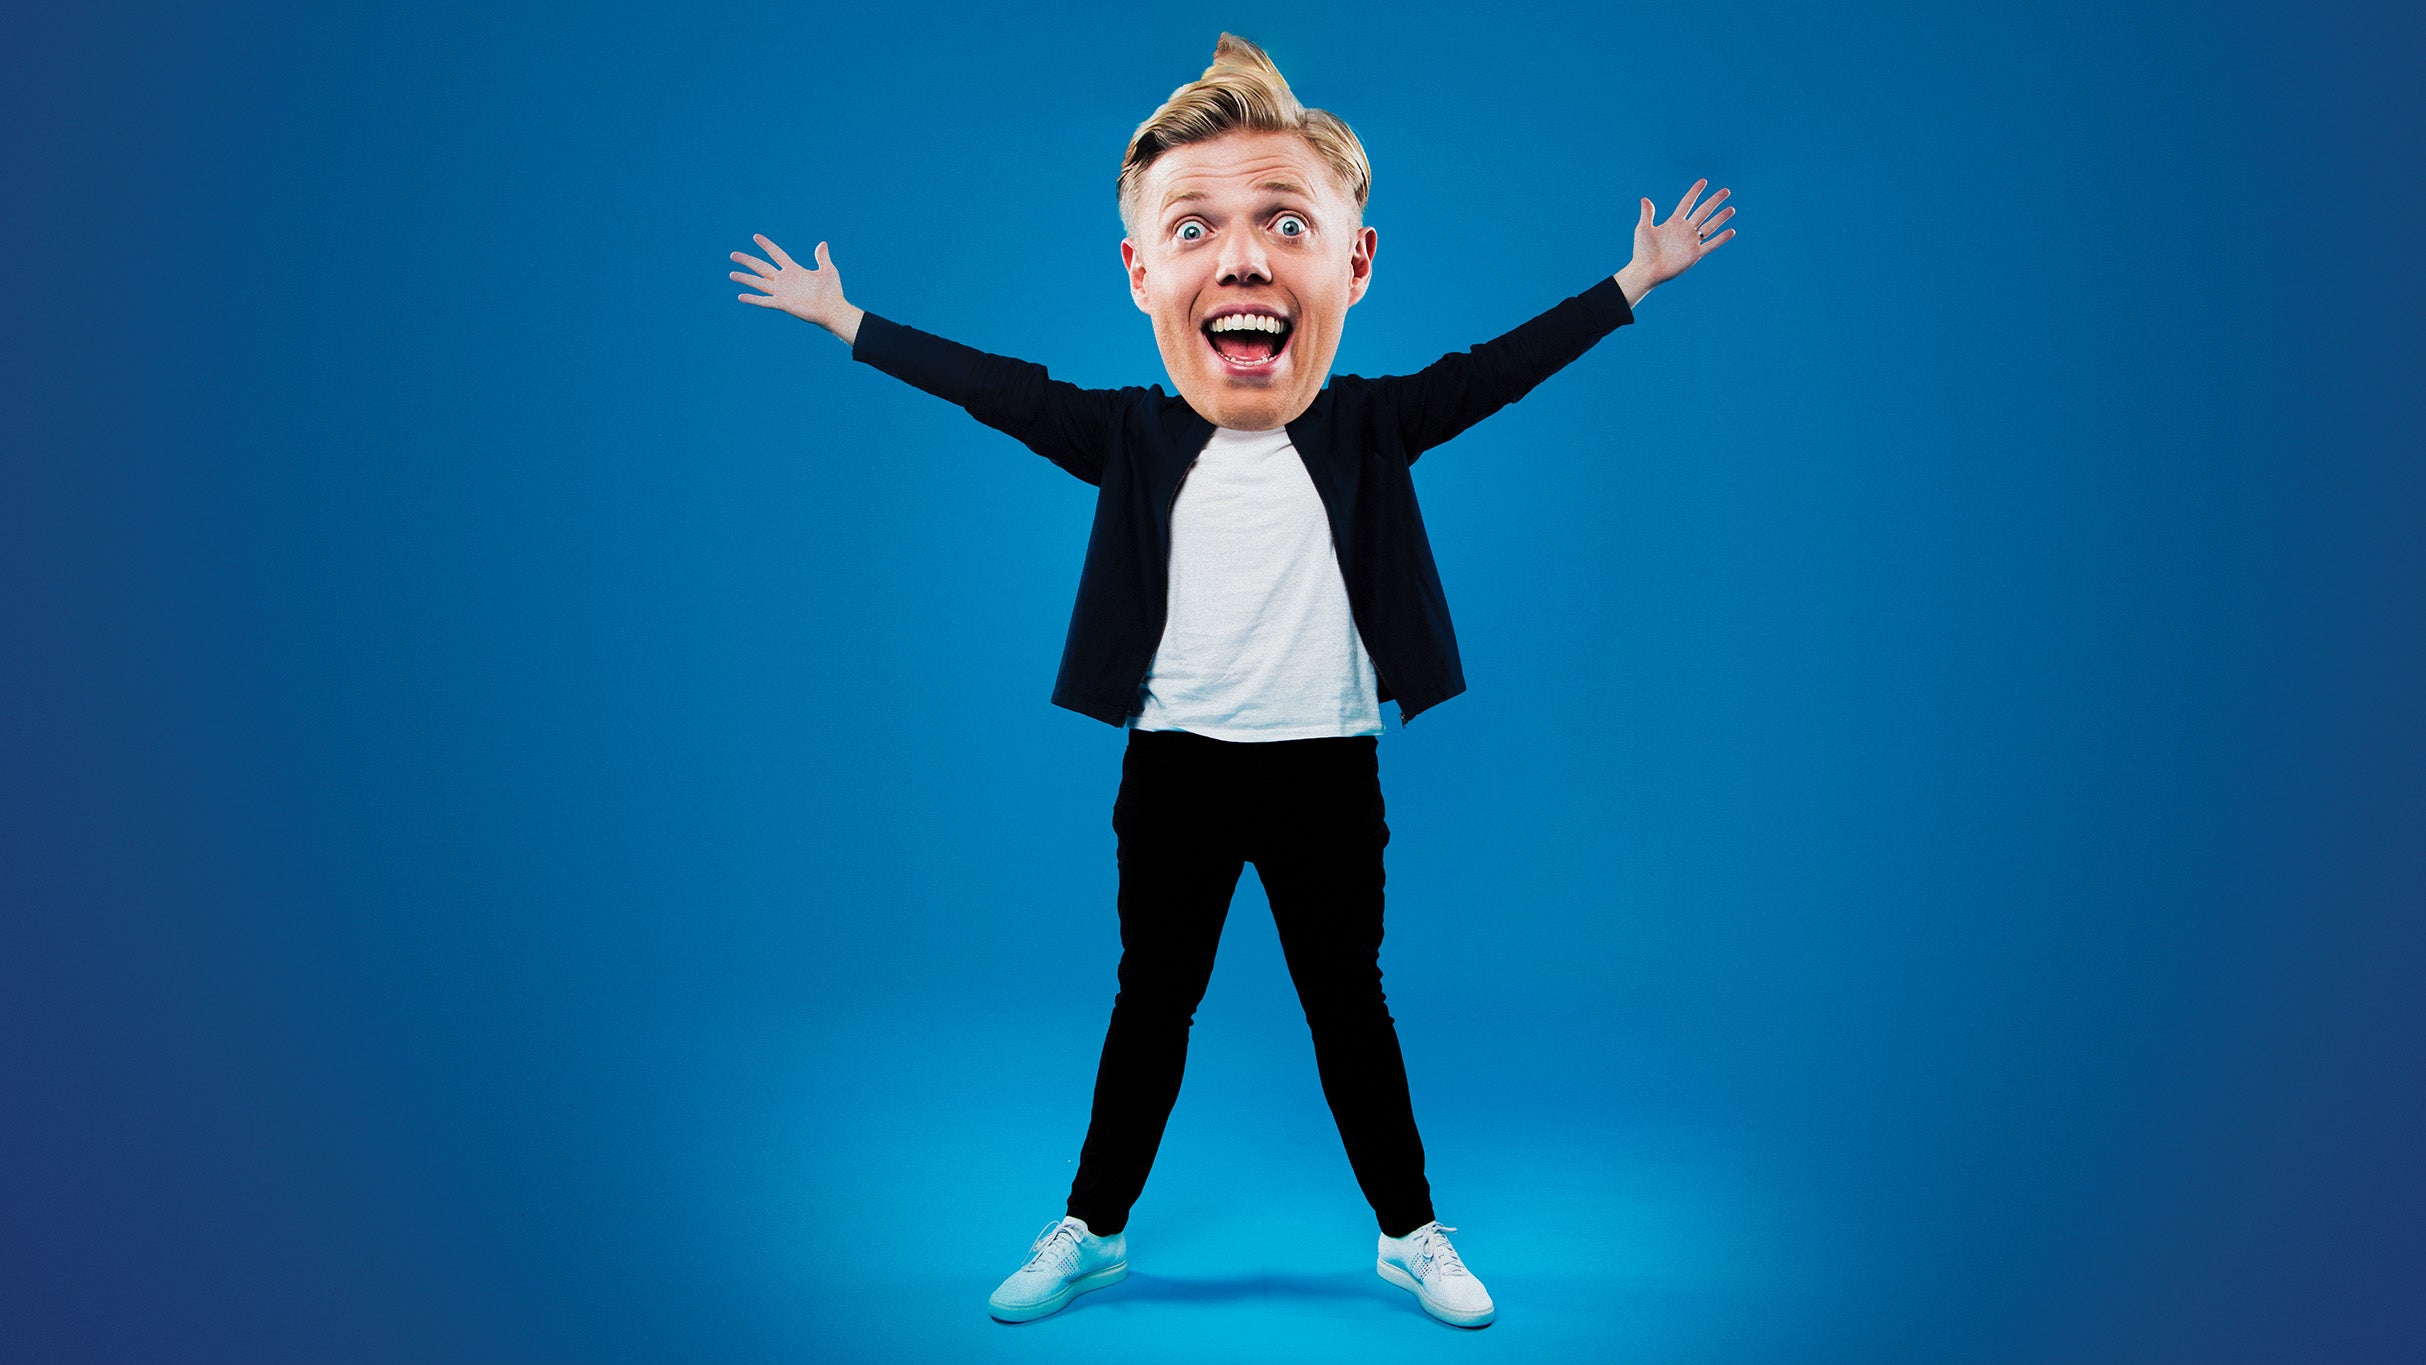 Image used with permission from Ticketmaster | Rob Beckett - Wallop! tickets